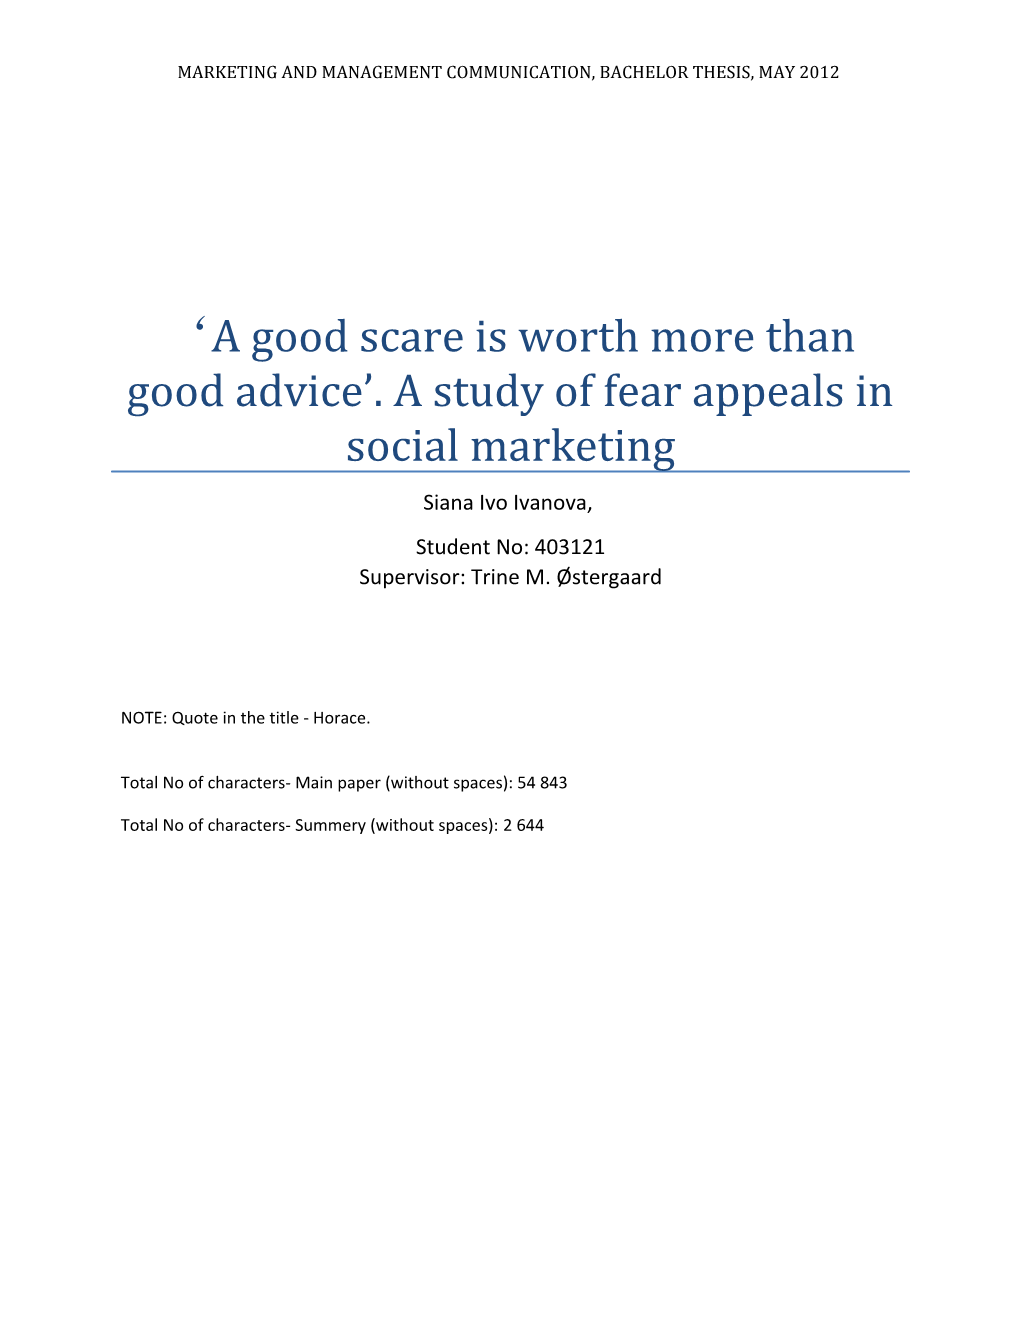 A Good Scare Is Worth More Than Good Advice . a Study of Fear Appeals in Social Marketing